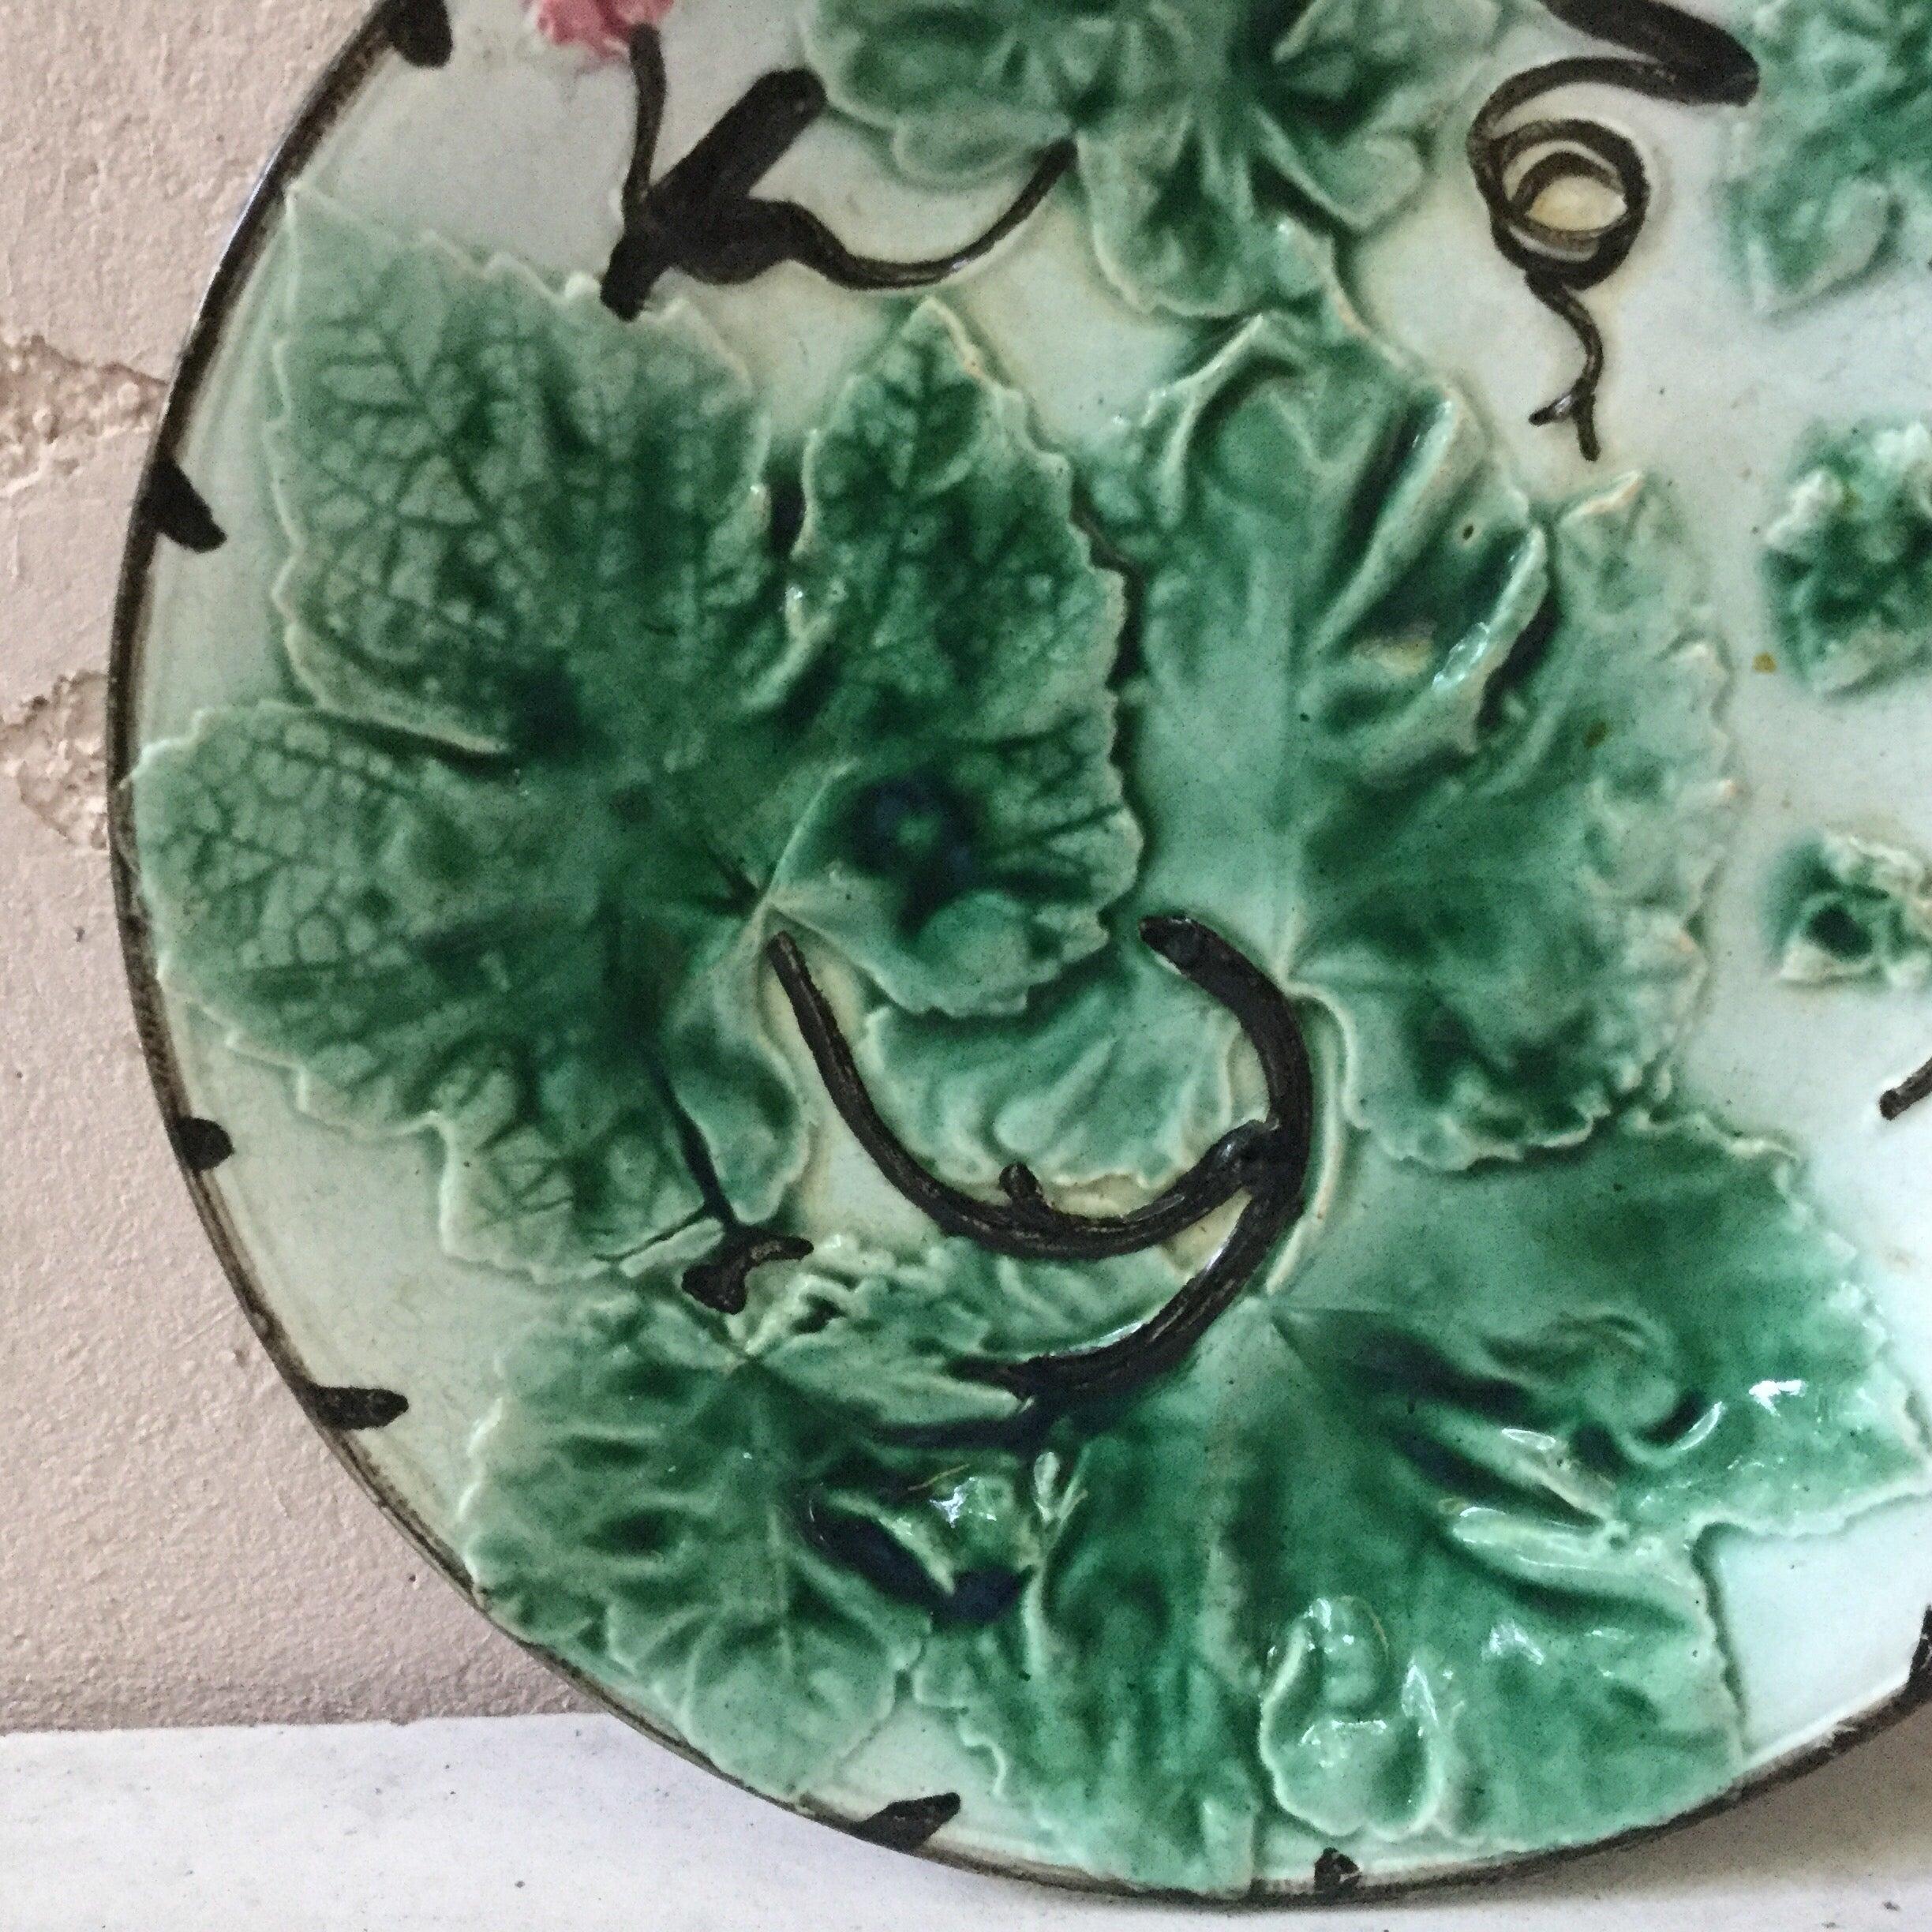 French Majolica leaves plate, circa 1880.
5 plates are available.